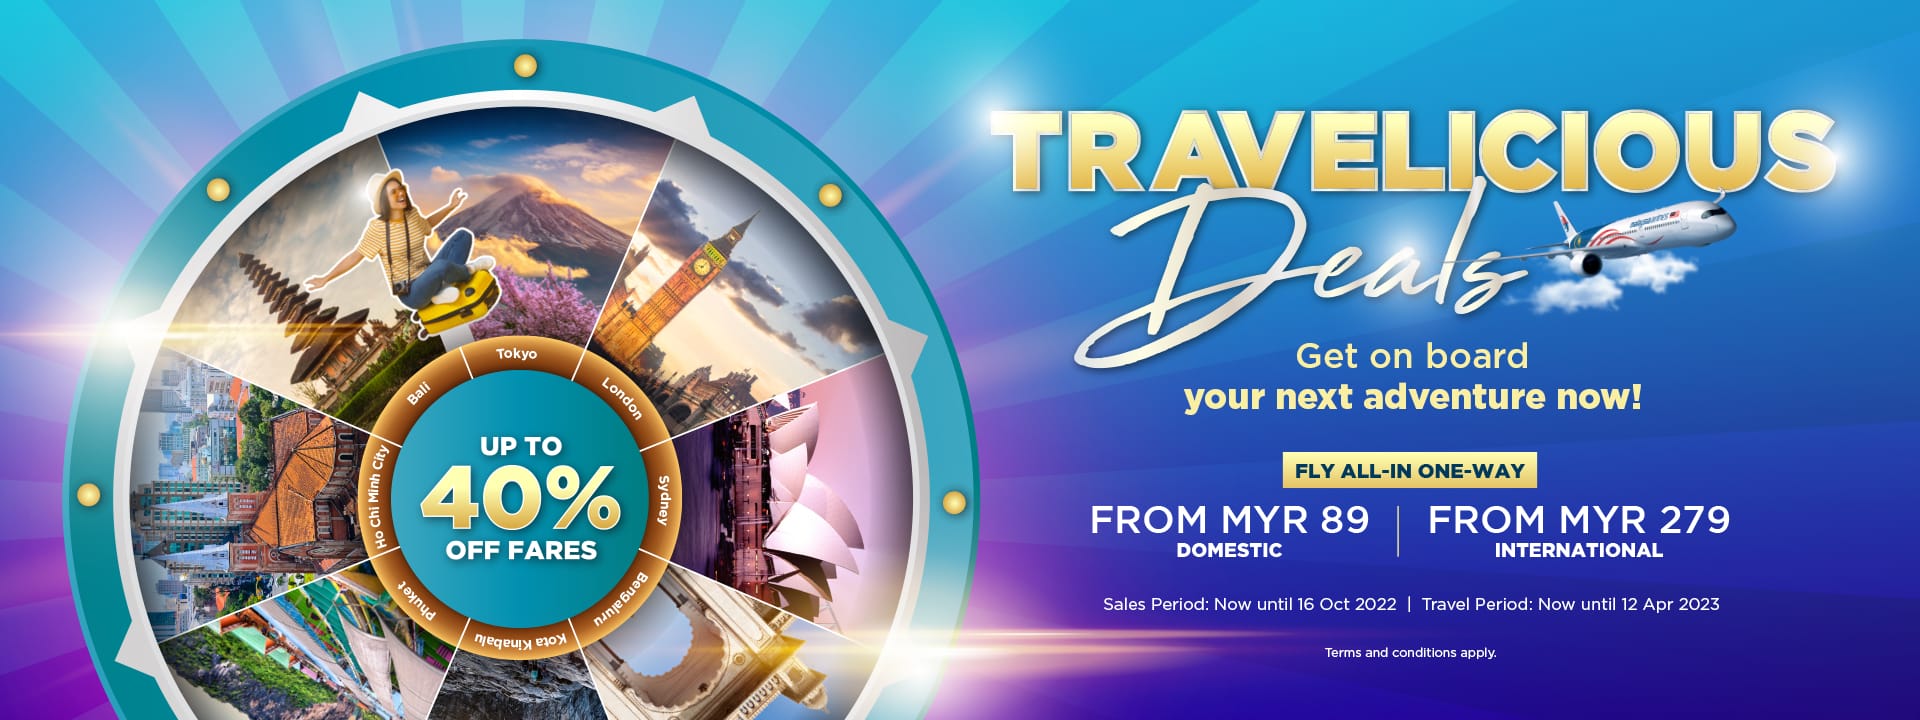 Malaysia Airlines Travelicious Deals - International MH travelicious flight deals banner